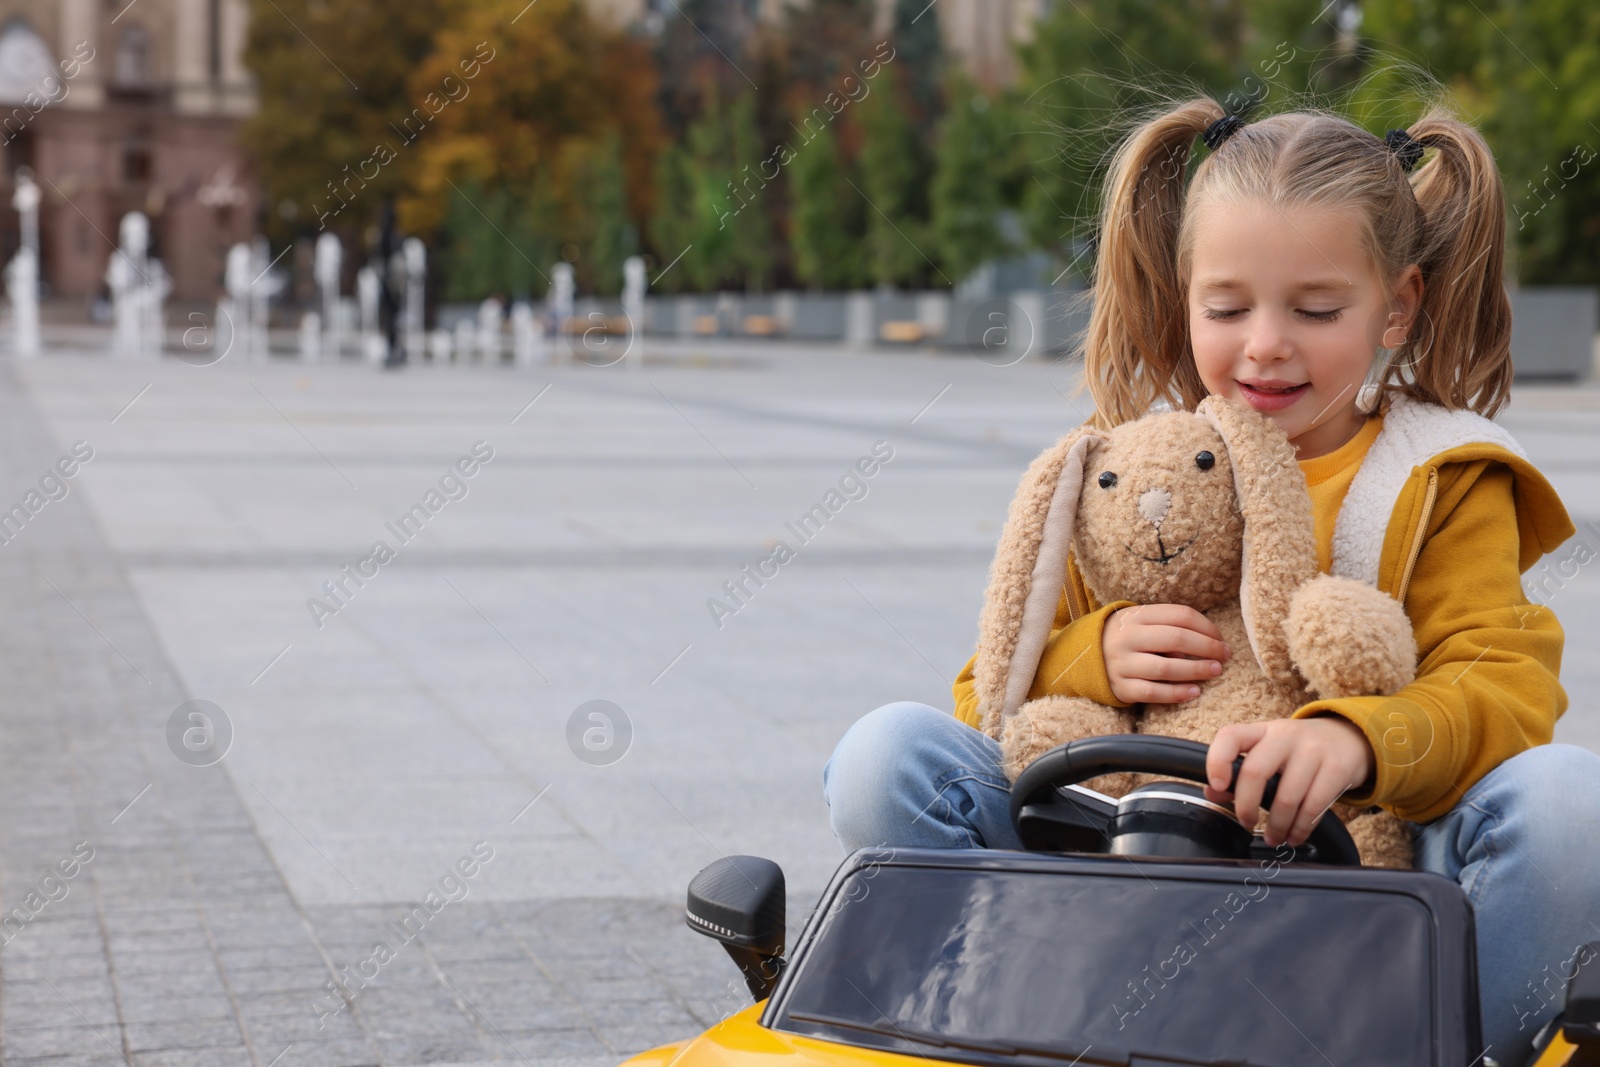 Photo of Cute little girl with toy bunny driving children's car on city street. Space for text